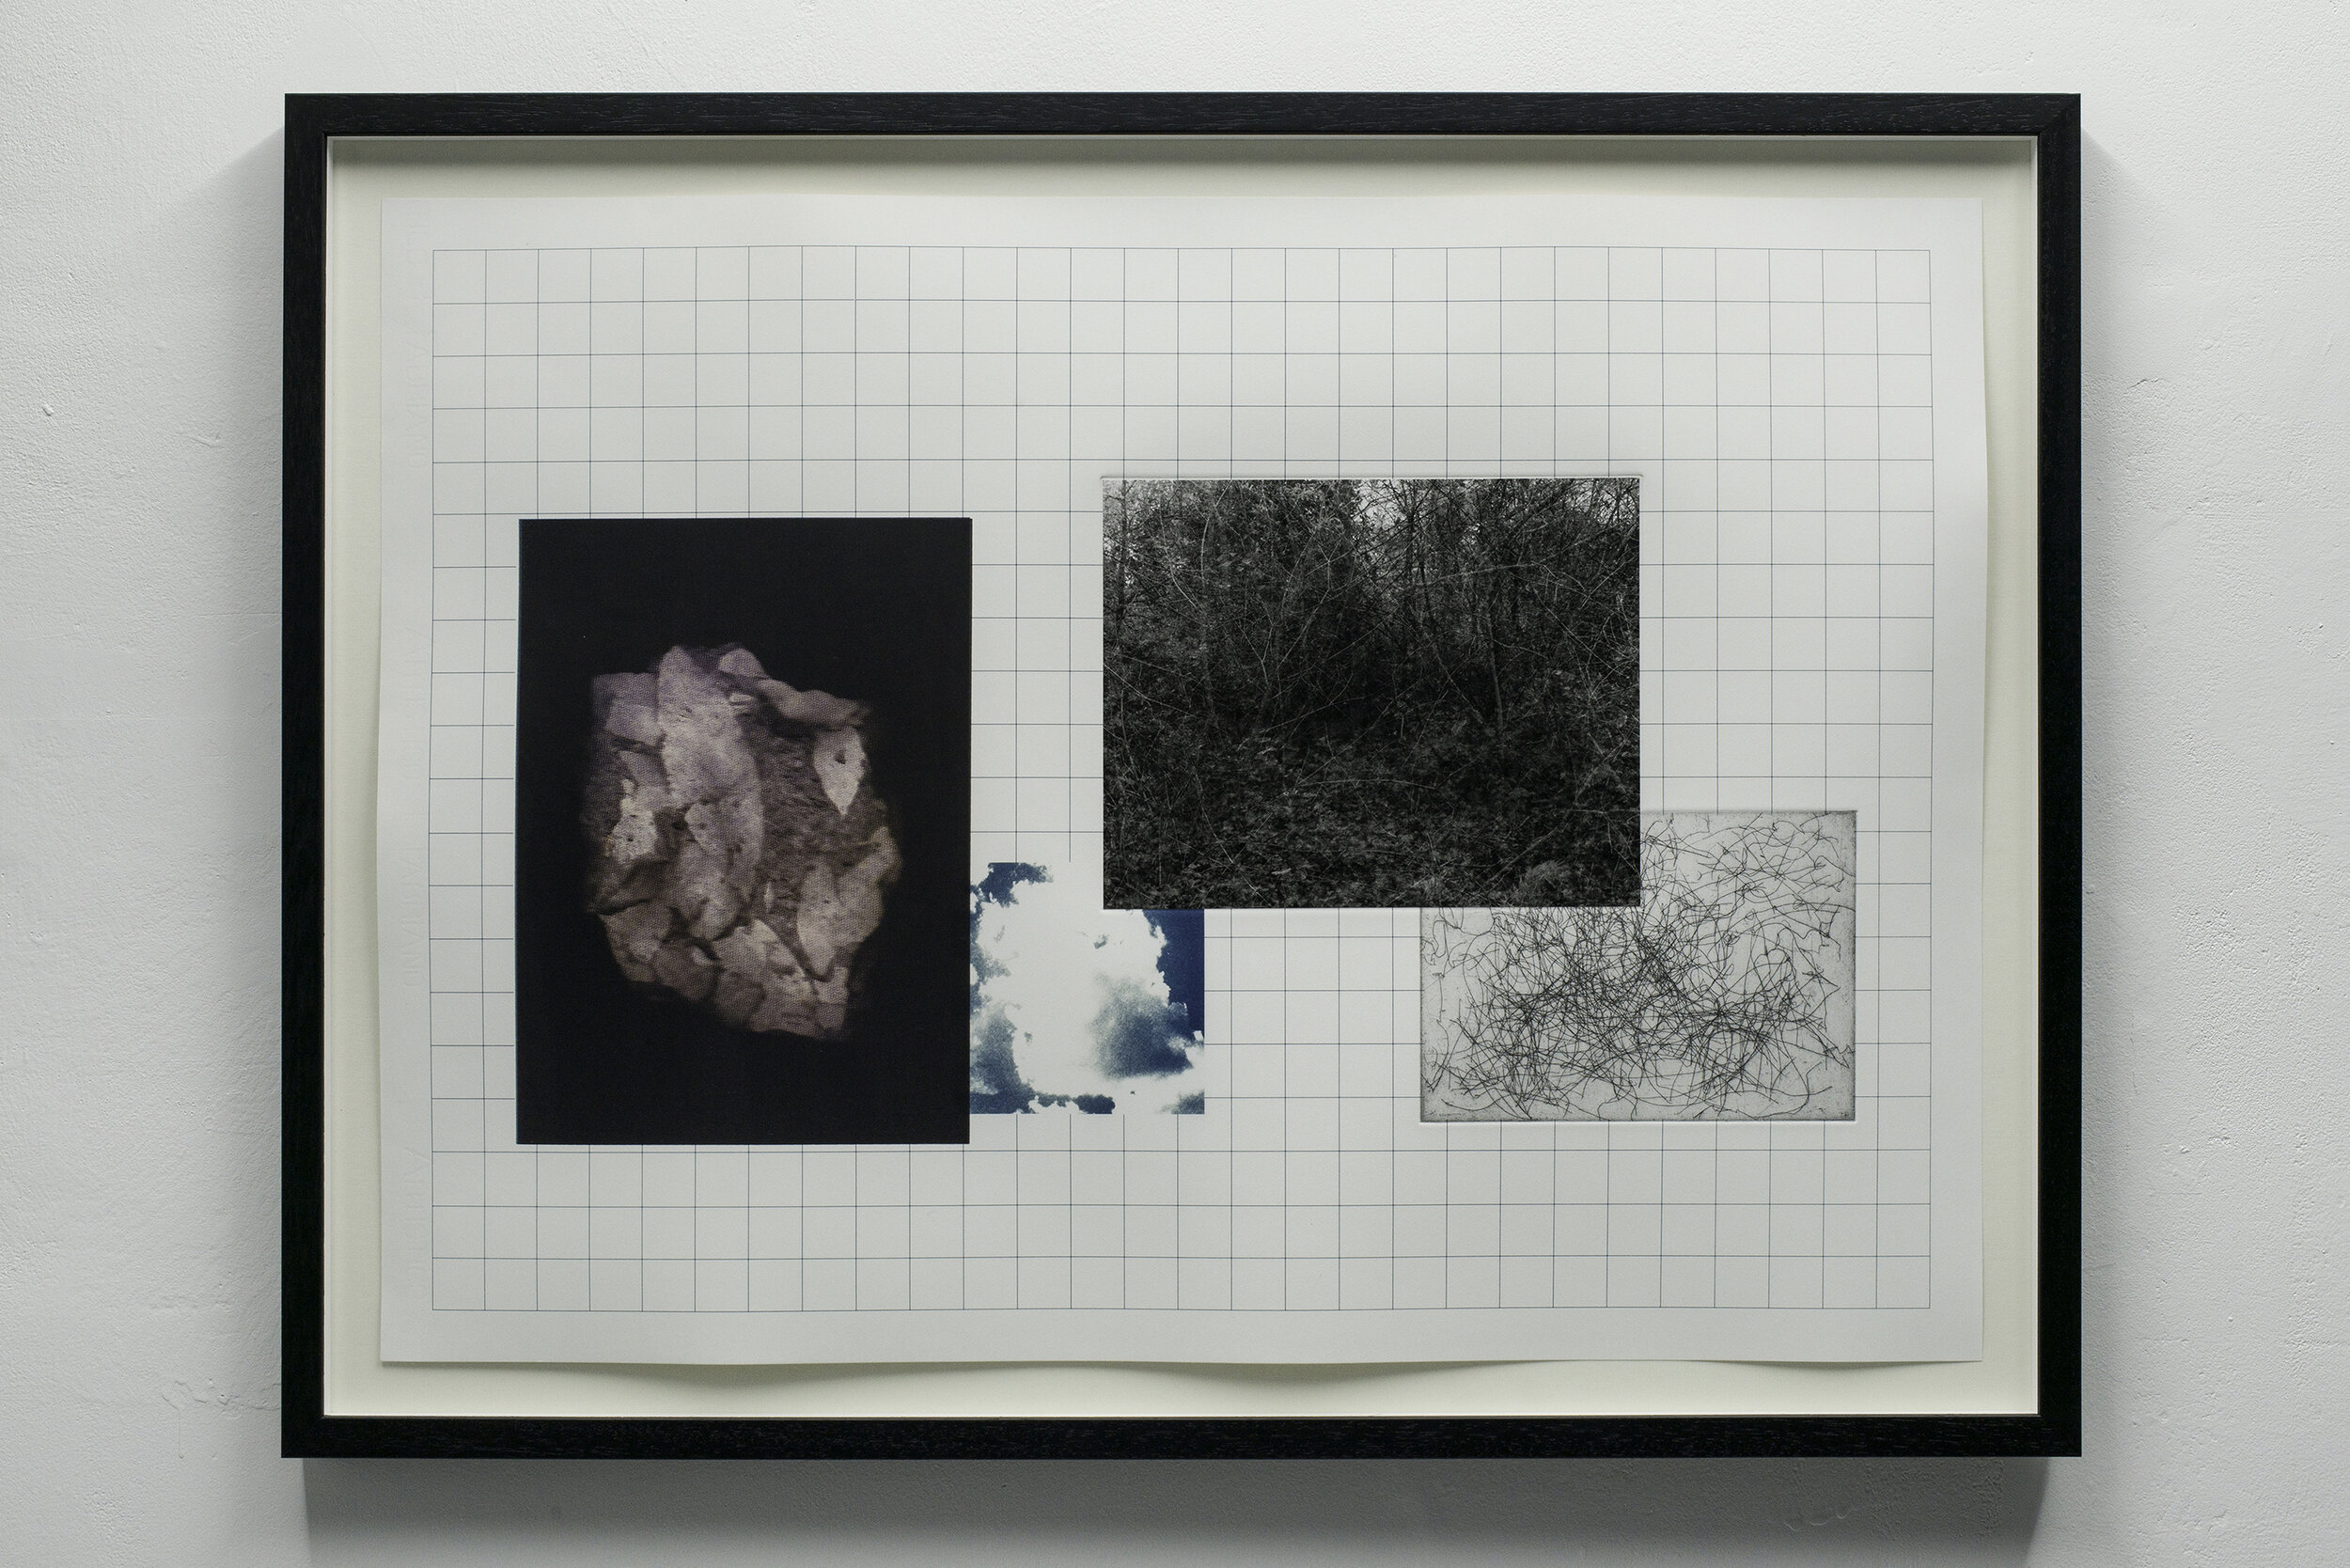   Just Another Layer of Death on Top of the Rest III , 2016, 55.5x68cm, cyanotype, silk screen print, hard-ground etching, and silver gelatine photograph 